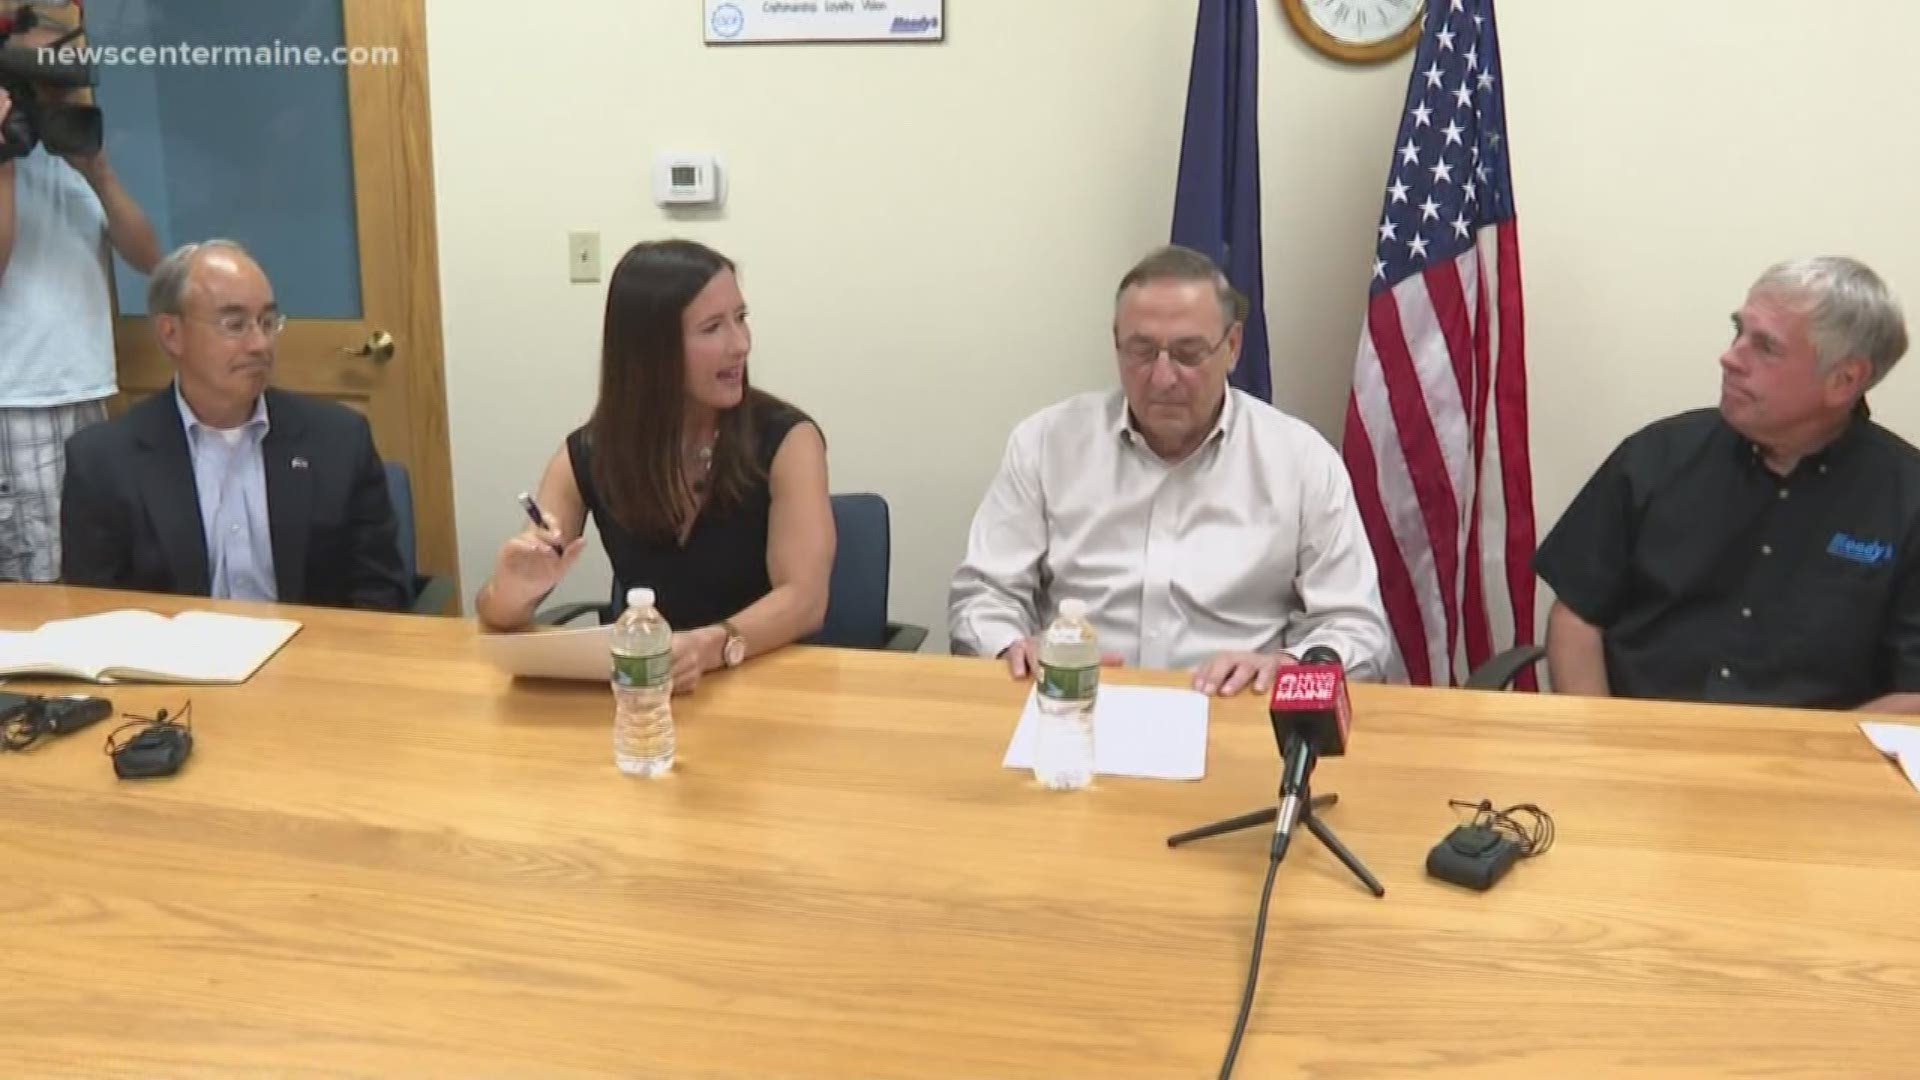 Members of Maine's GOP, including former Gov. Paul LePage and former Rep. Bruce Poliquin, held a round-table Thursday, August 22 to praise the economy of the U.S. under President Trump.